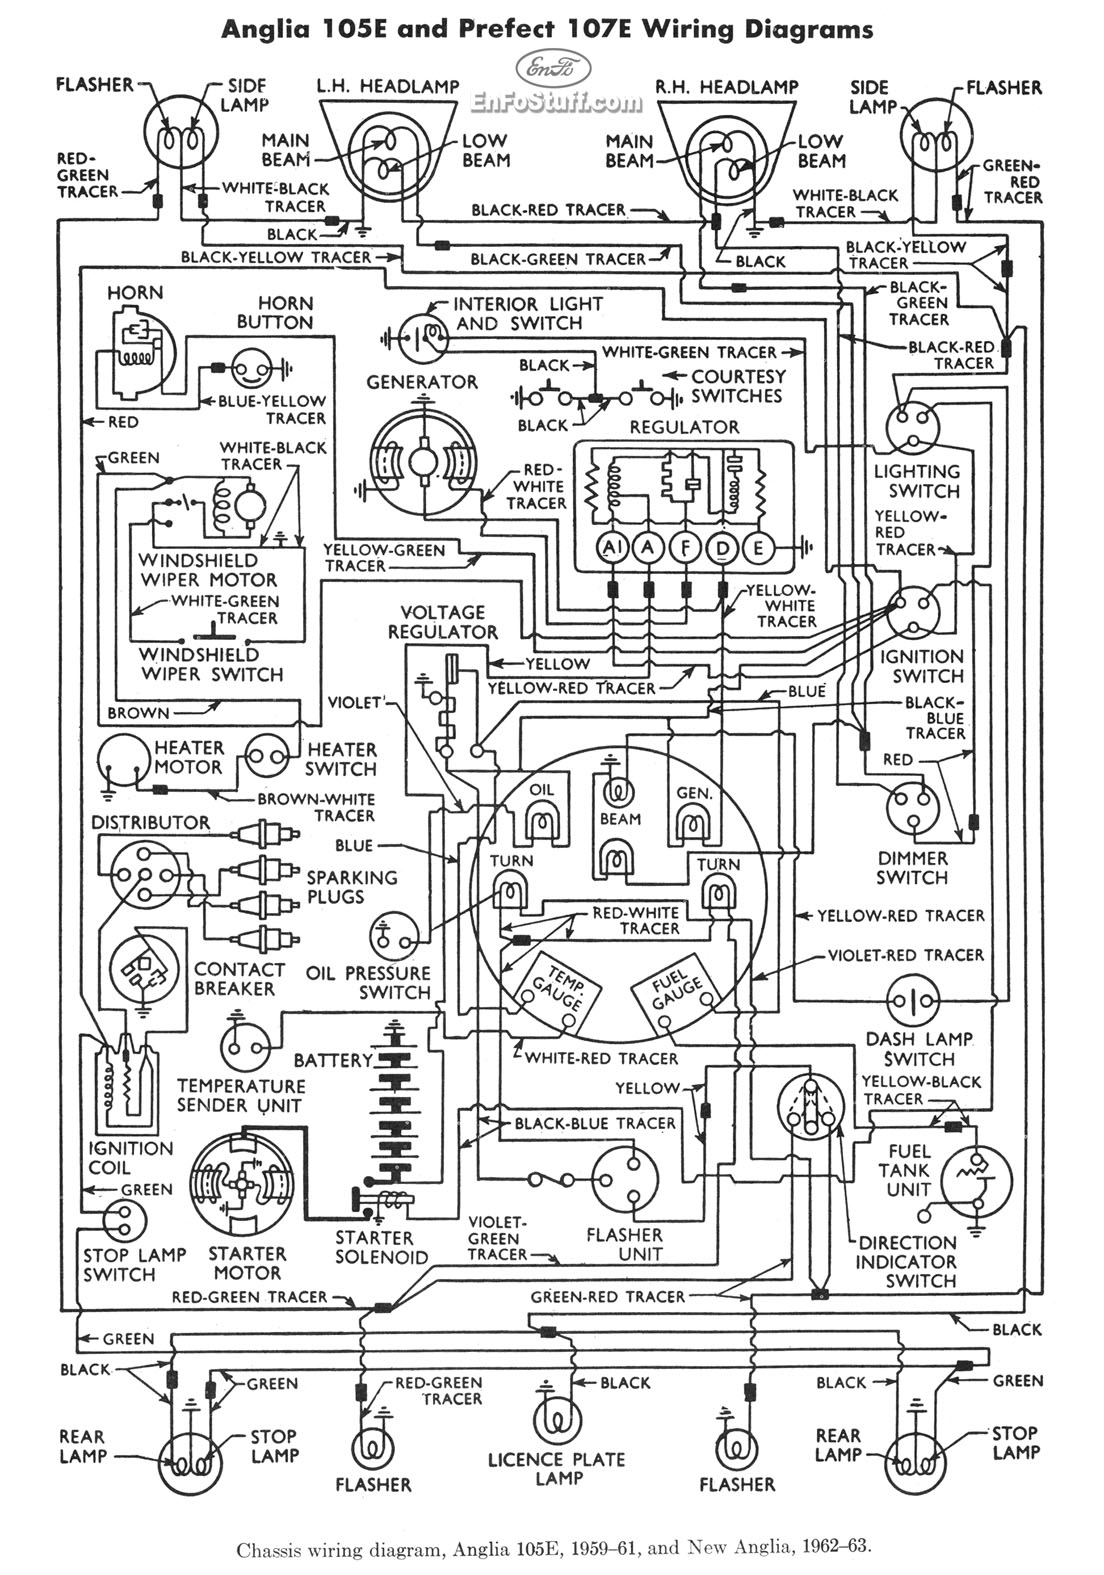 1991 Ford ranger electrical schematic #9